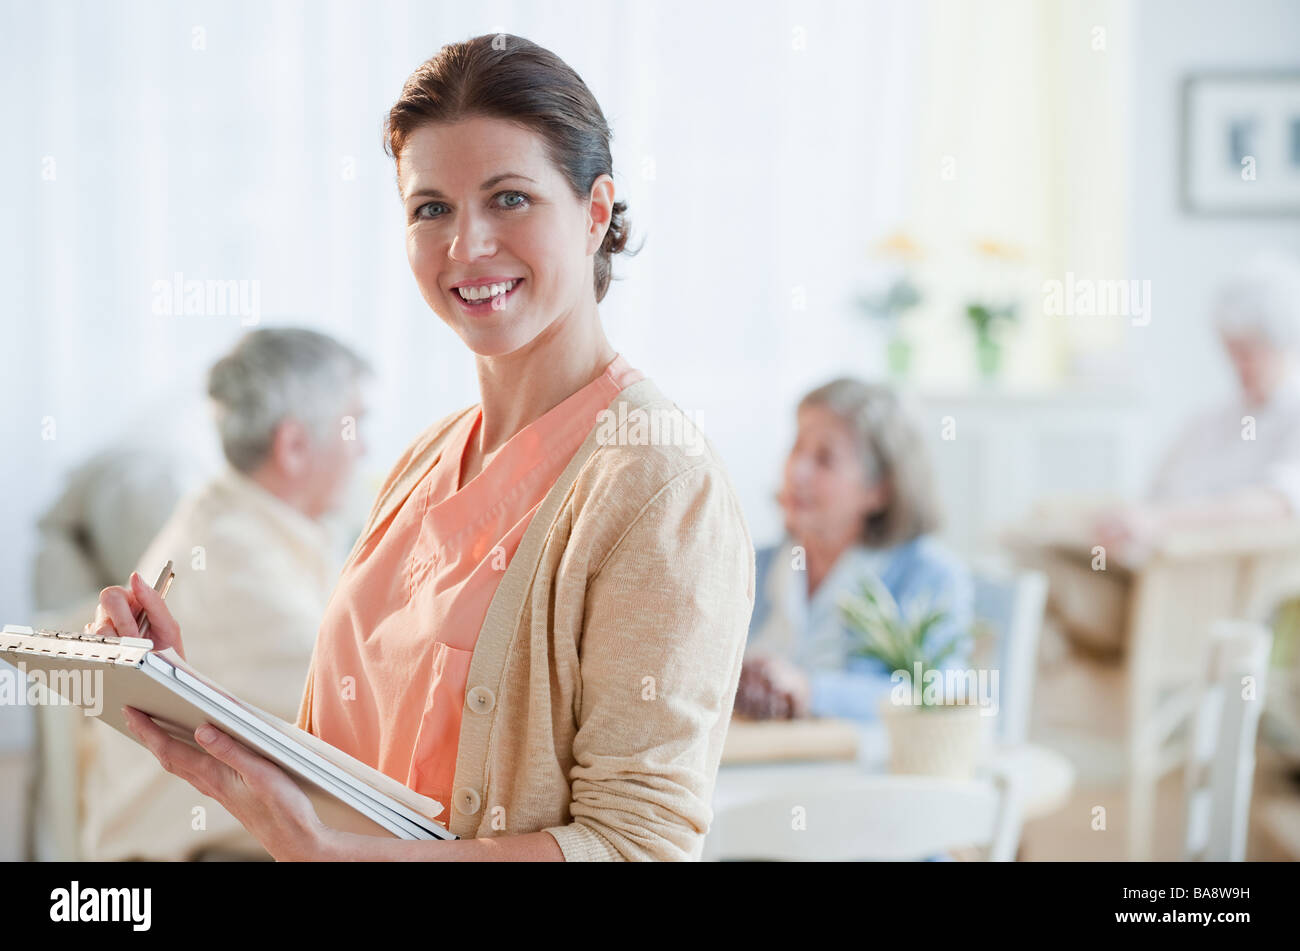 Nurse writing on patient’s medical chart Stock Photo